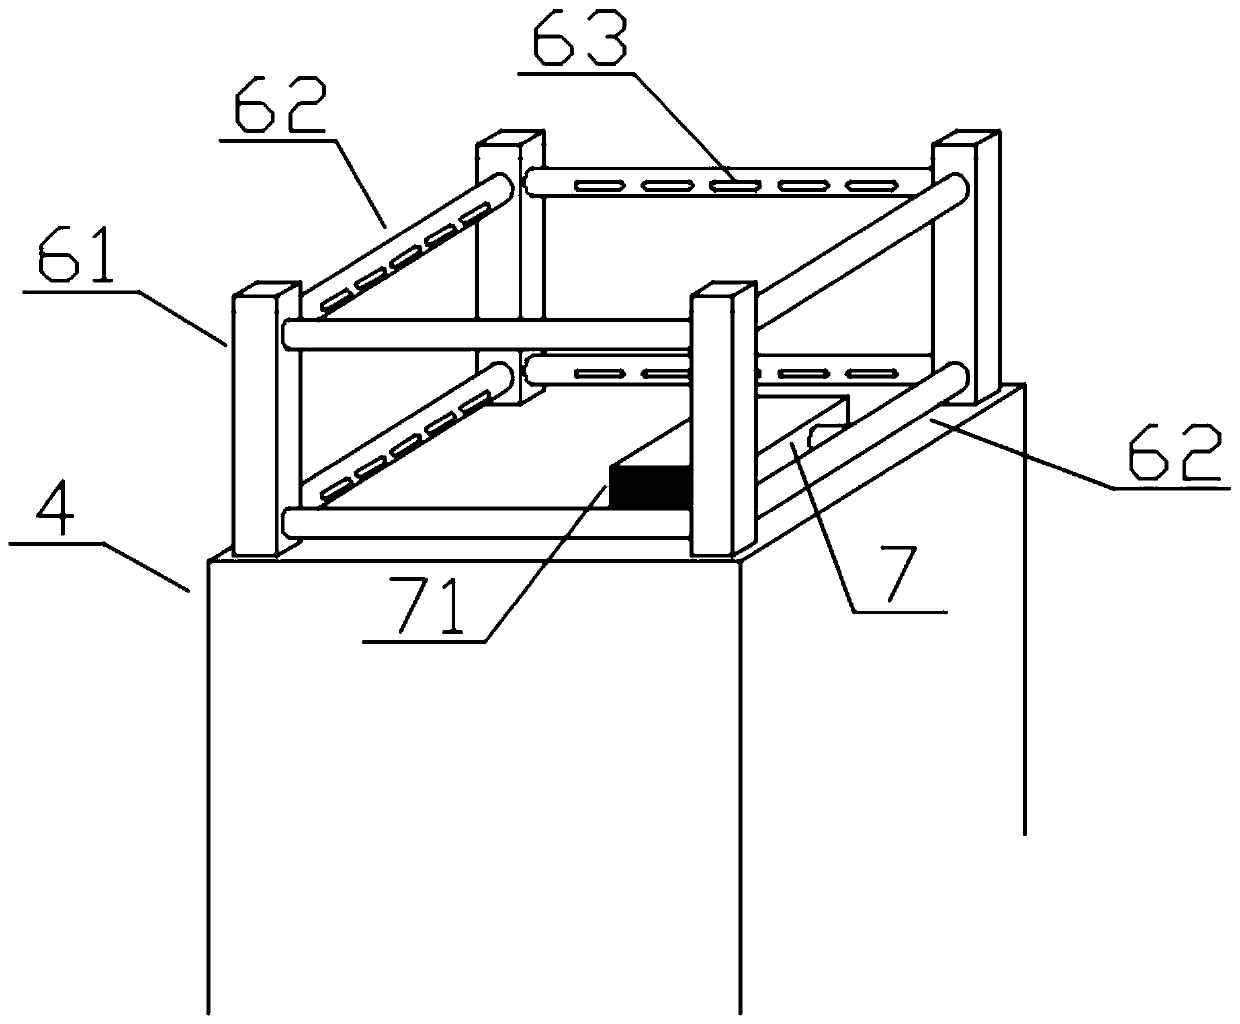 Elevator repairing and protecting system based on image recognition